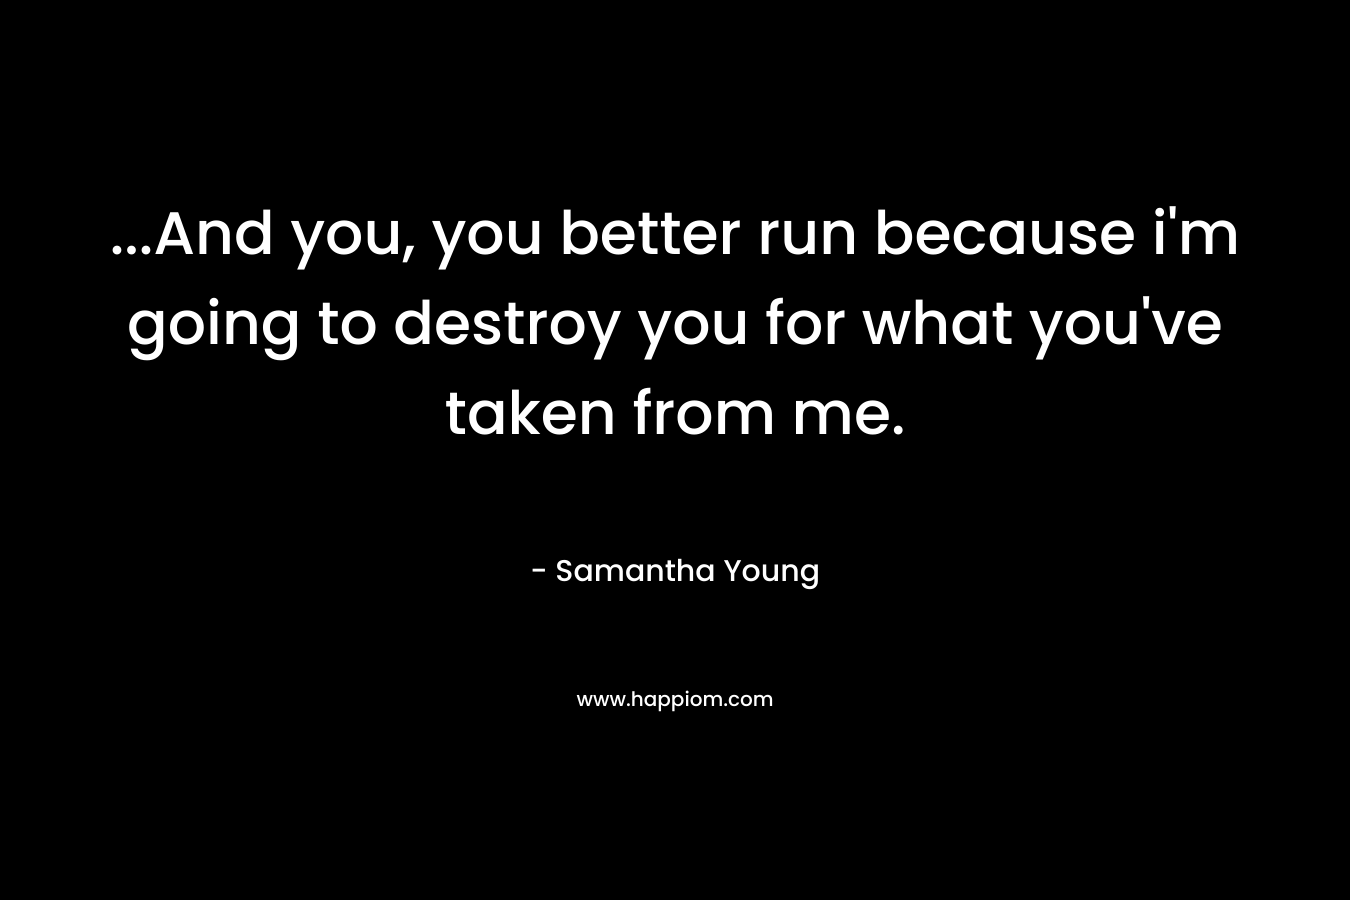 ...And you, you better run because i'm going to destroy you for what you've taken from me.